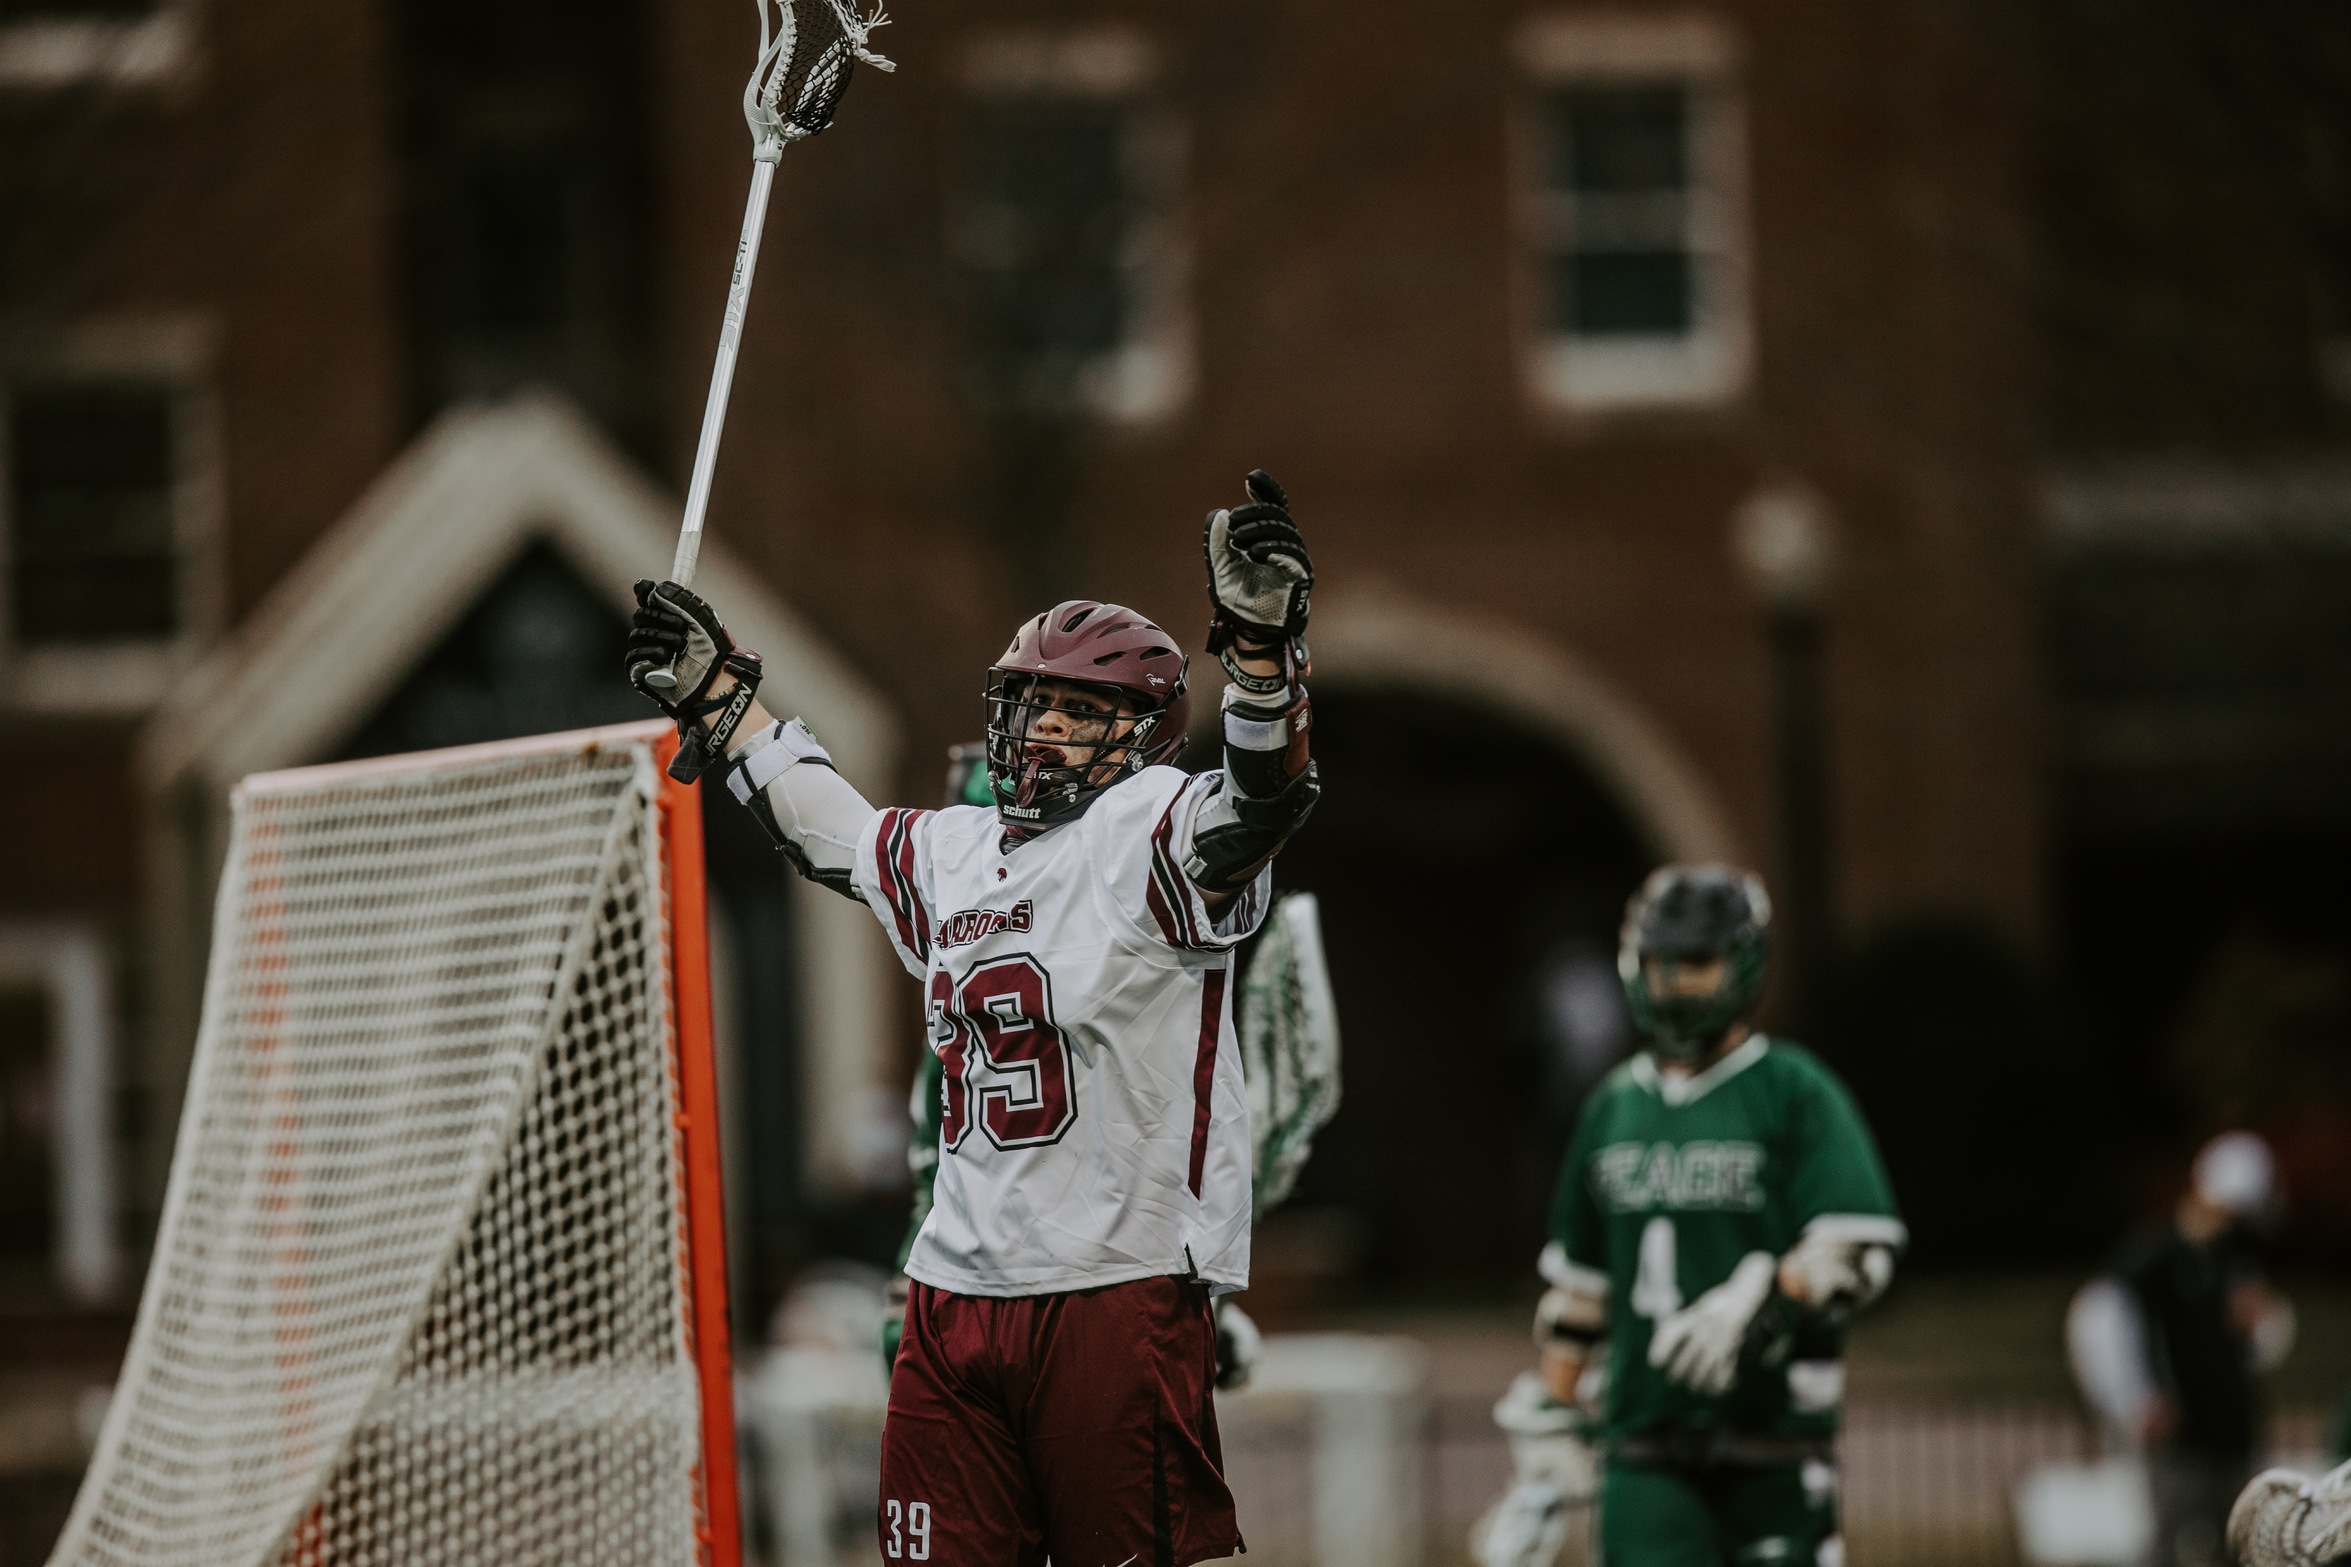 action photo of RC lacrosse player Wyatt Whitlow celebrating a goal